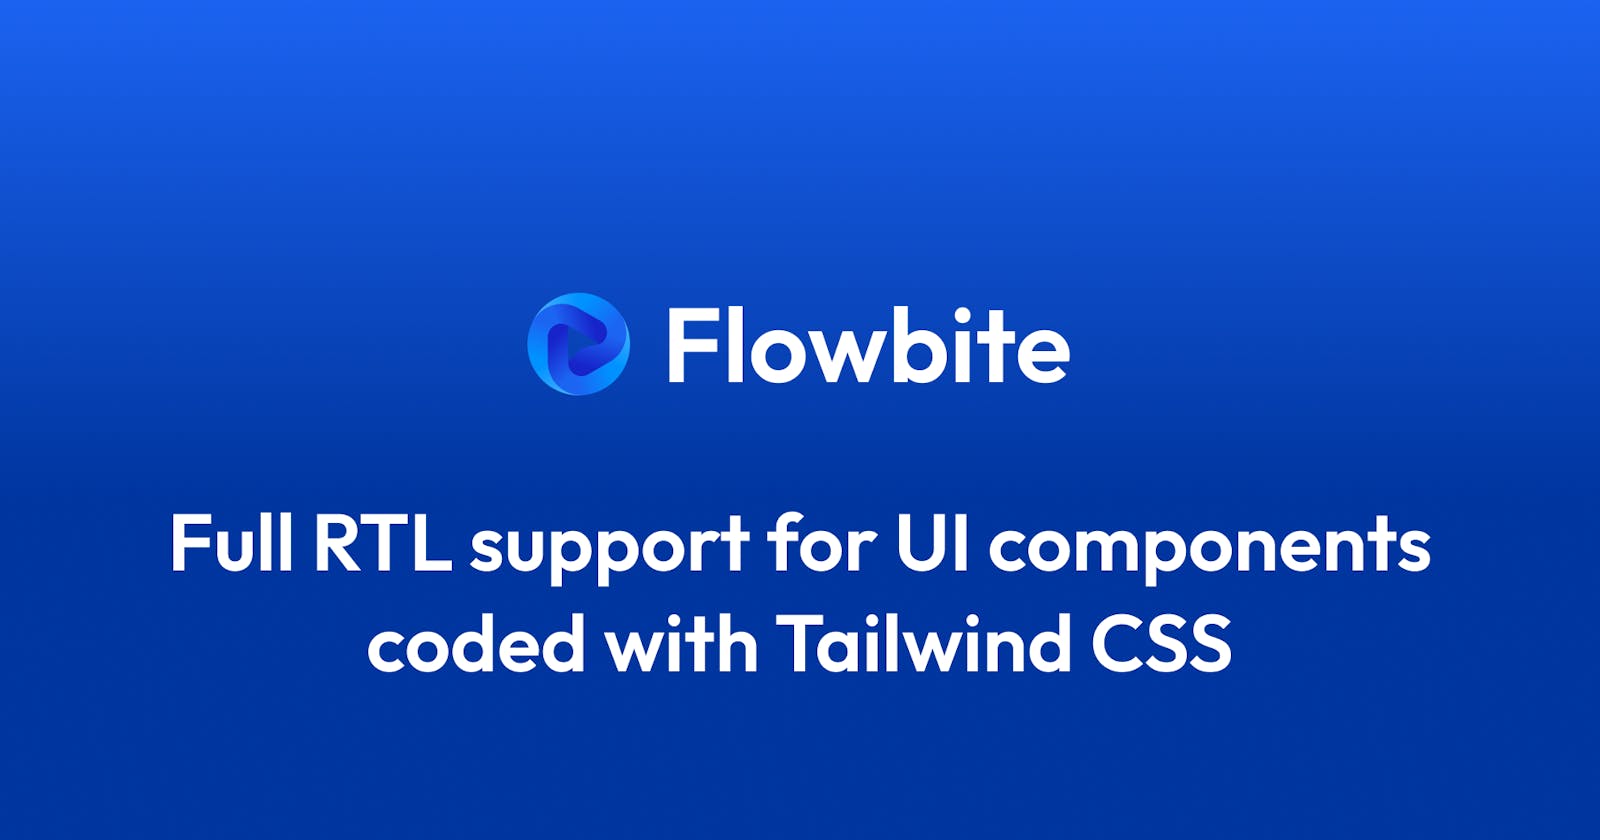 Tailwind CSS RTL support for UI components (Flowbite)